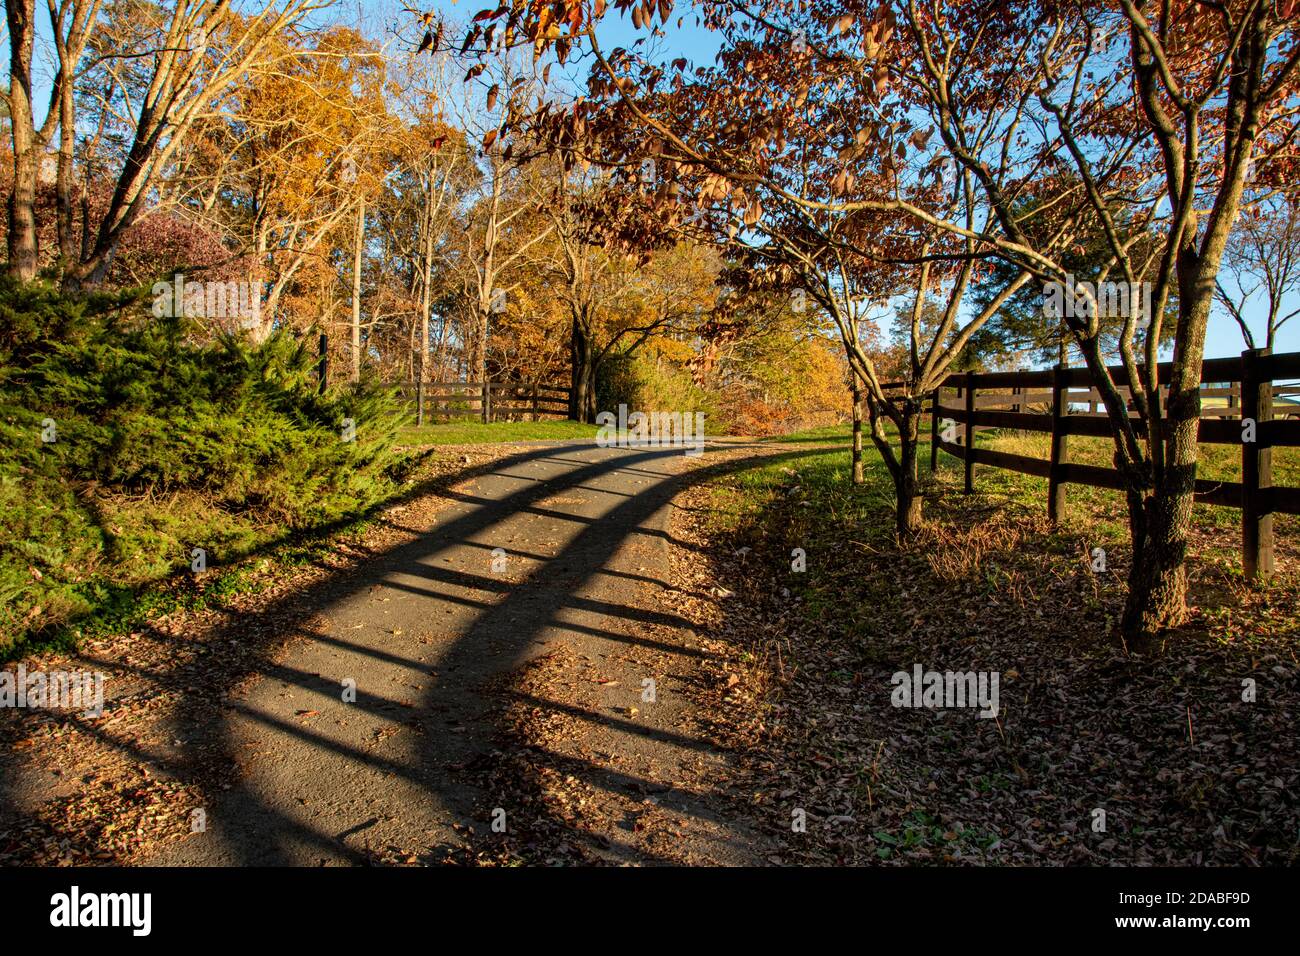 Trees and shadow of fence along gravel road in central Virginia in autumn. Stock Photo